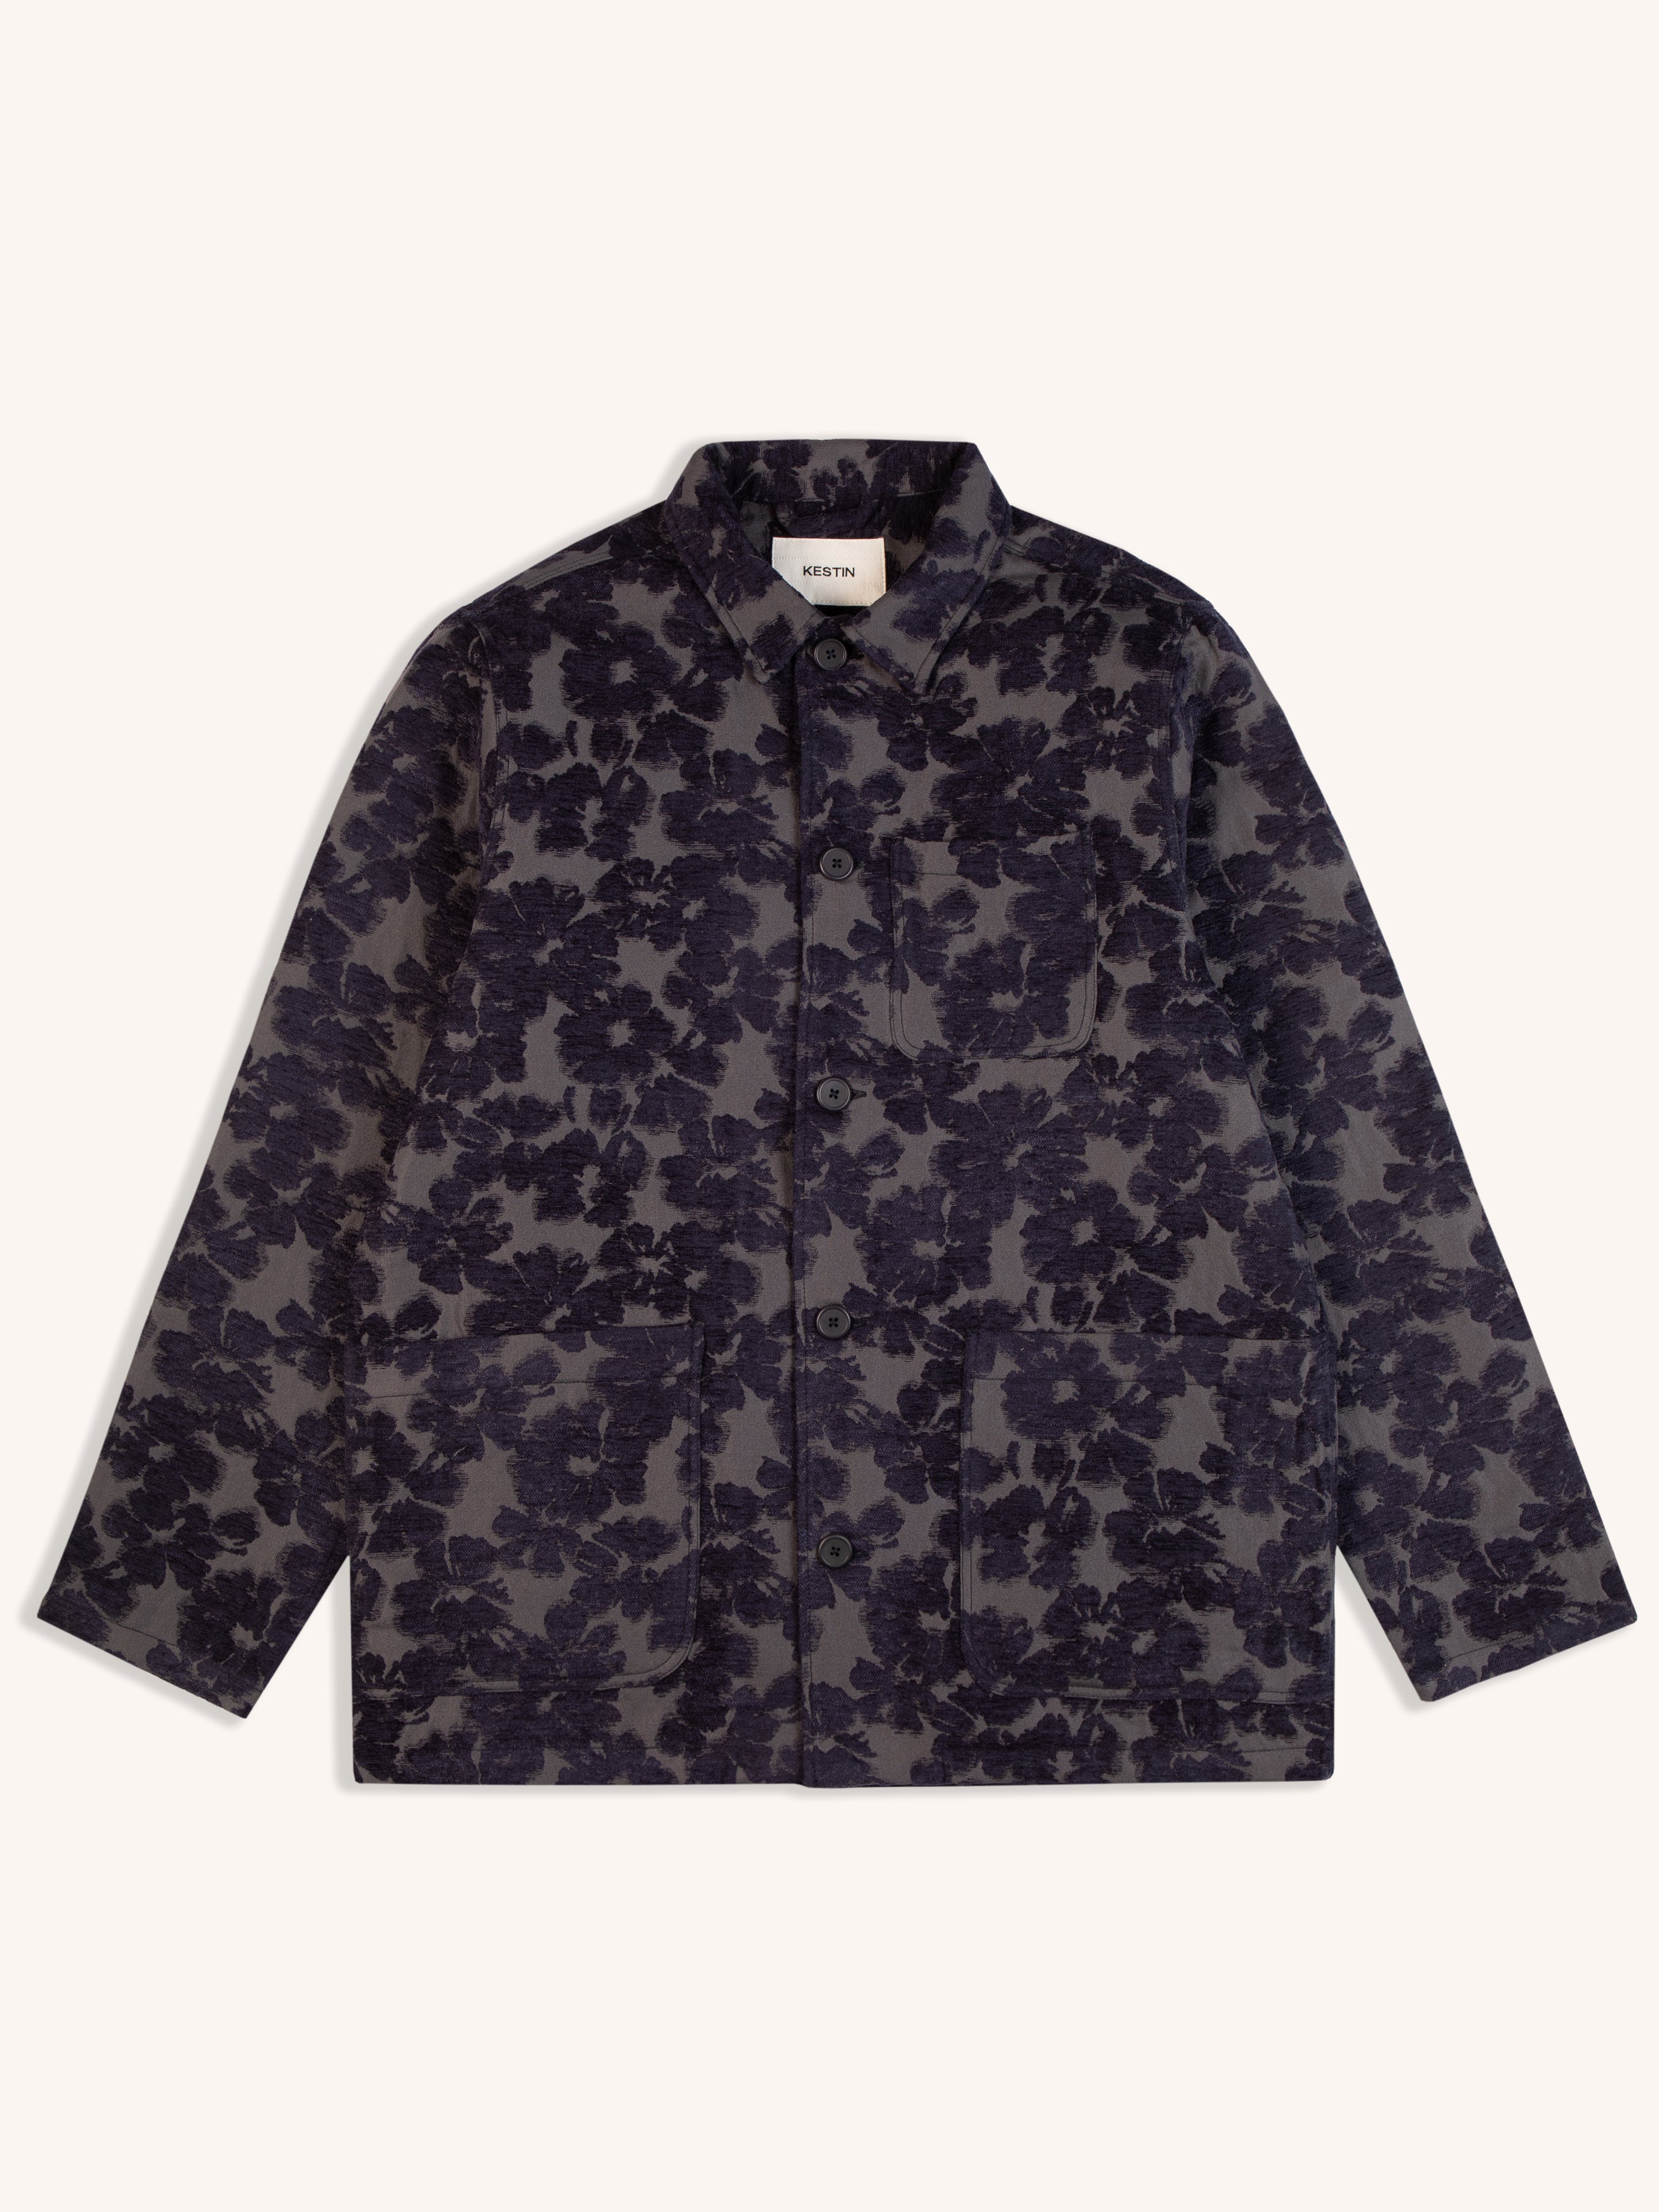 A navy blue jacket from Scottish menswear designer KESTIN, made from a floral Japanese fabric.